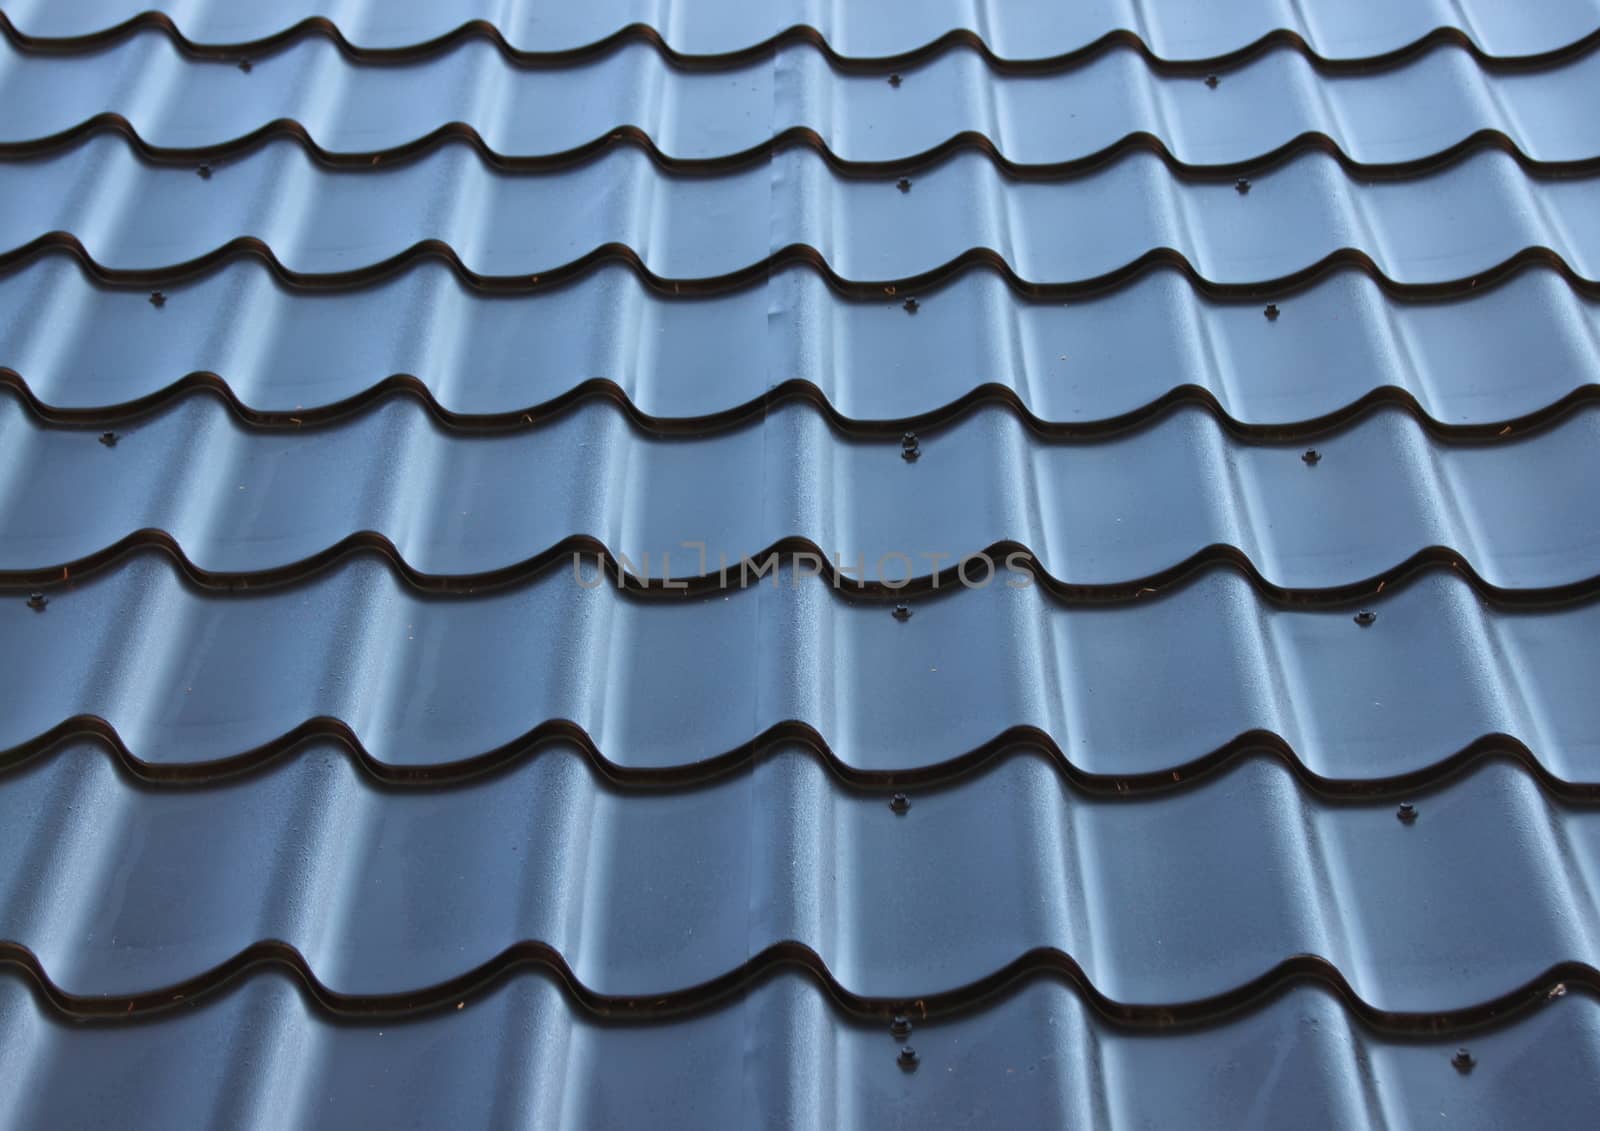 Curved black metal roof with wave design